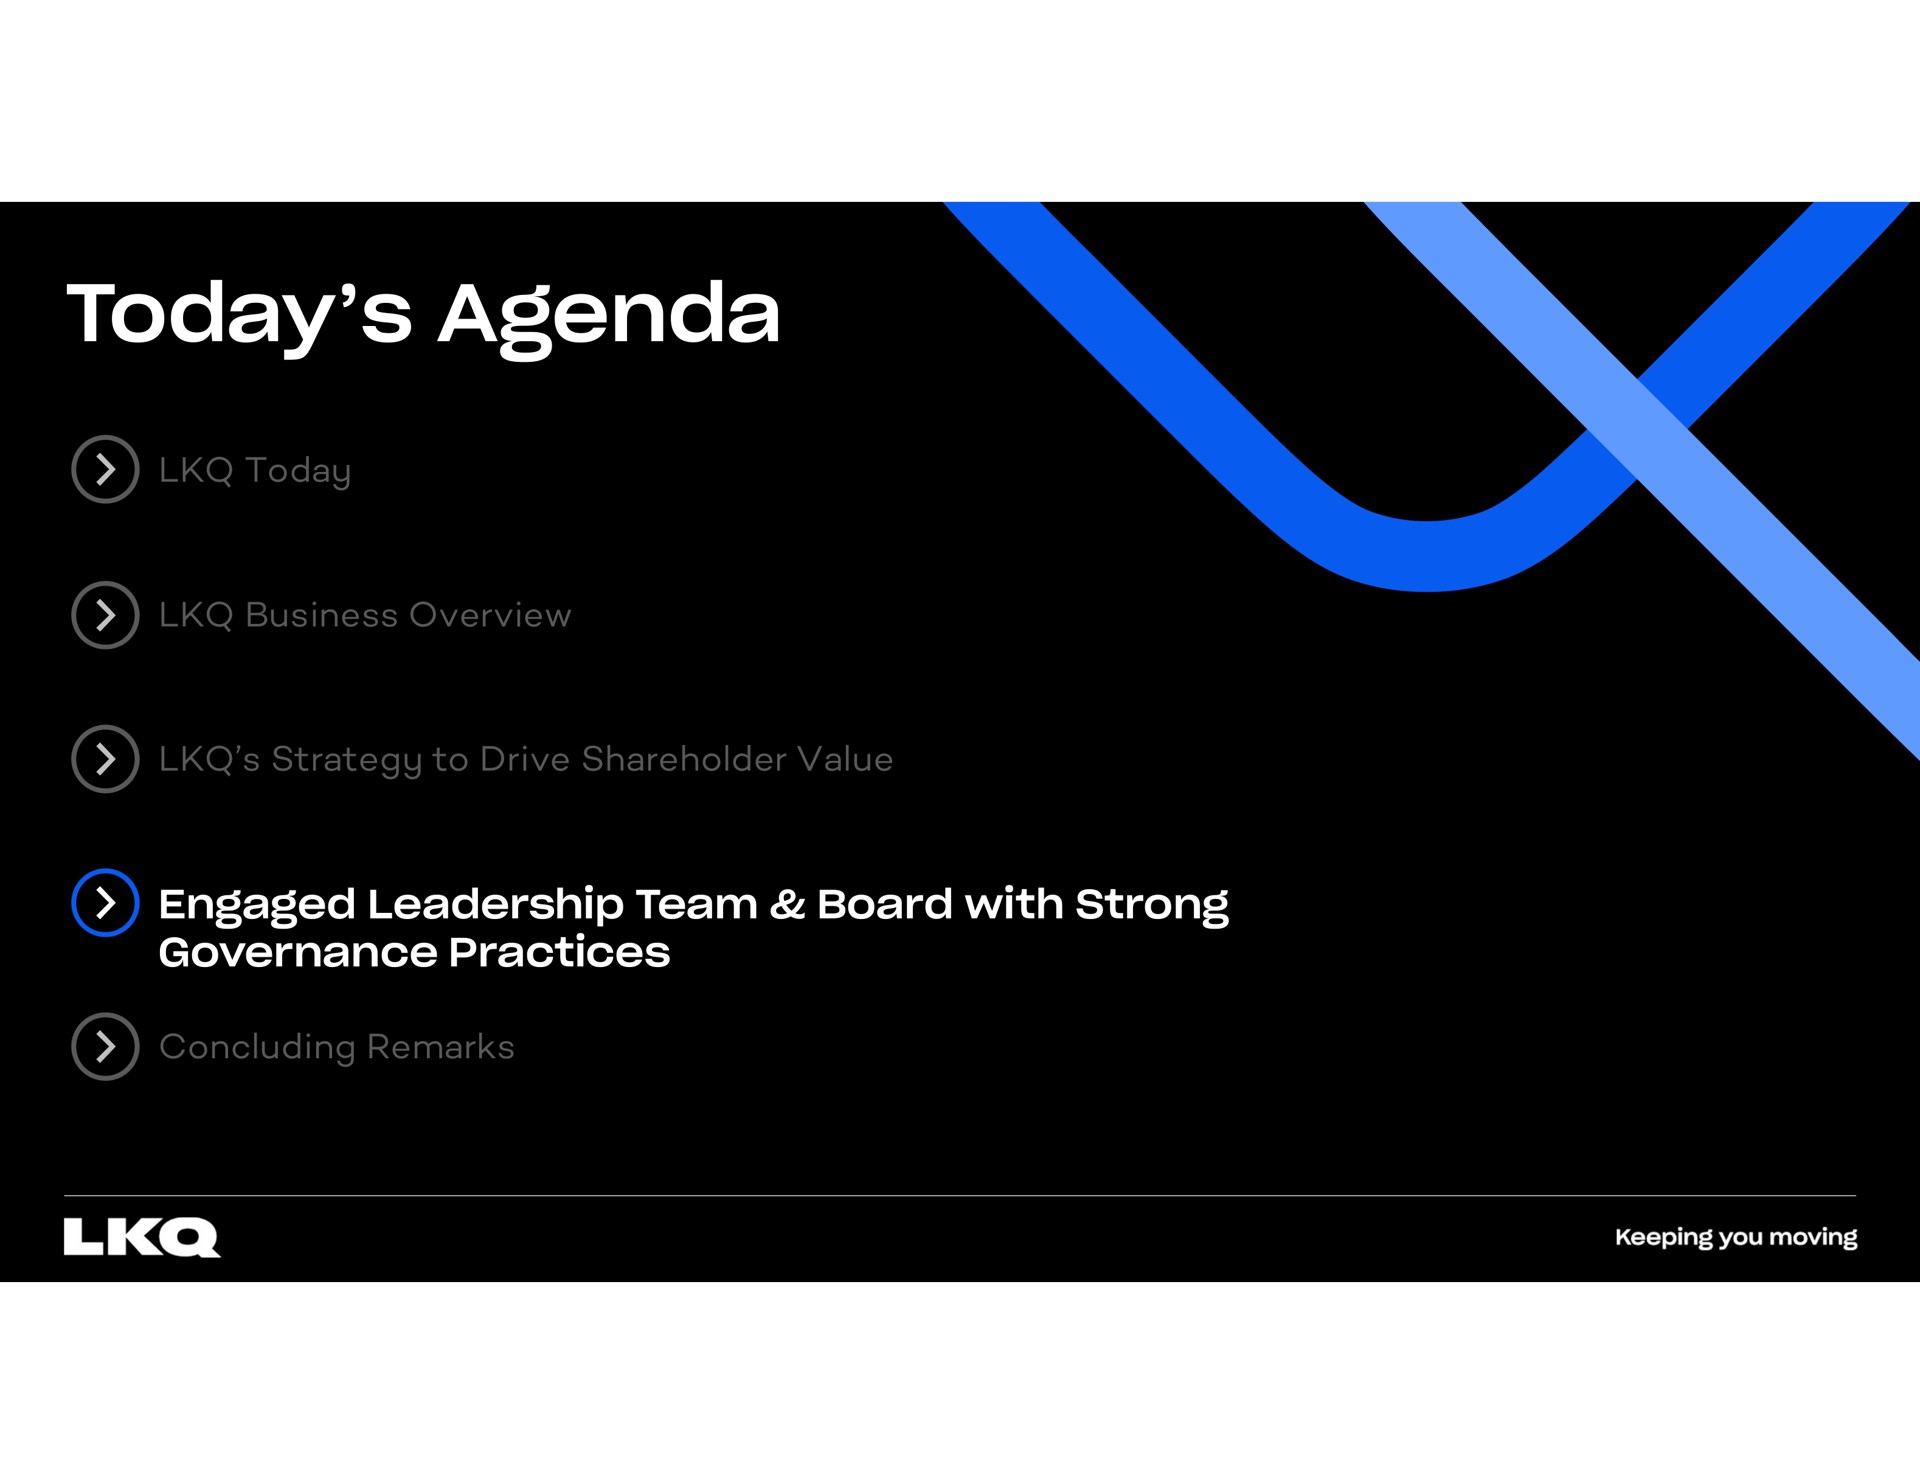 today agenda today business overview strategy to drive shareholder value engaged leadership team board with strong governance practices concluding remarks | LKQ